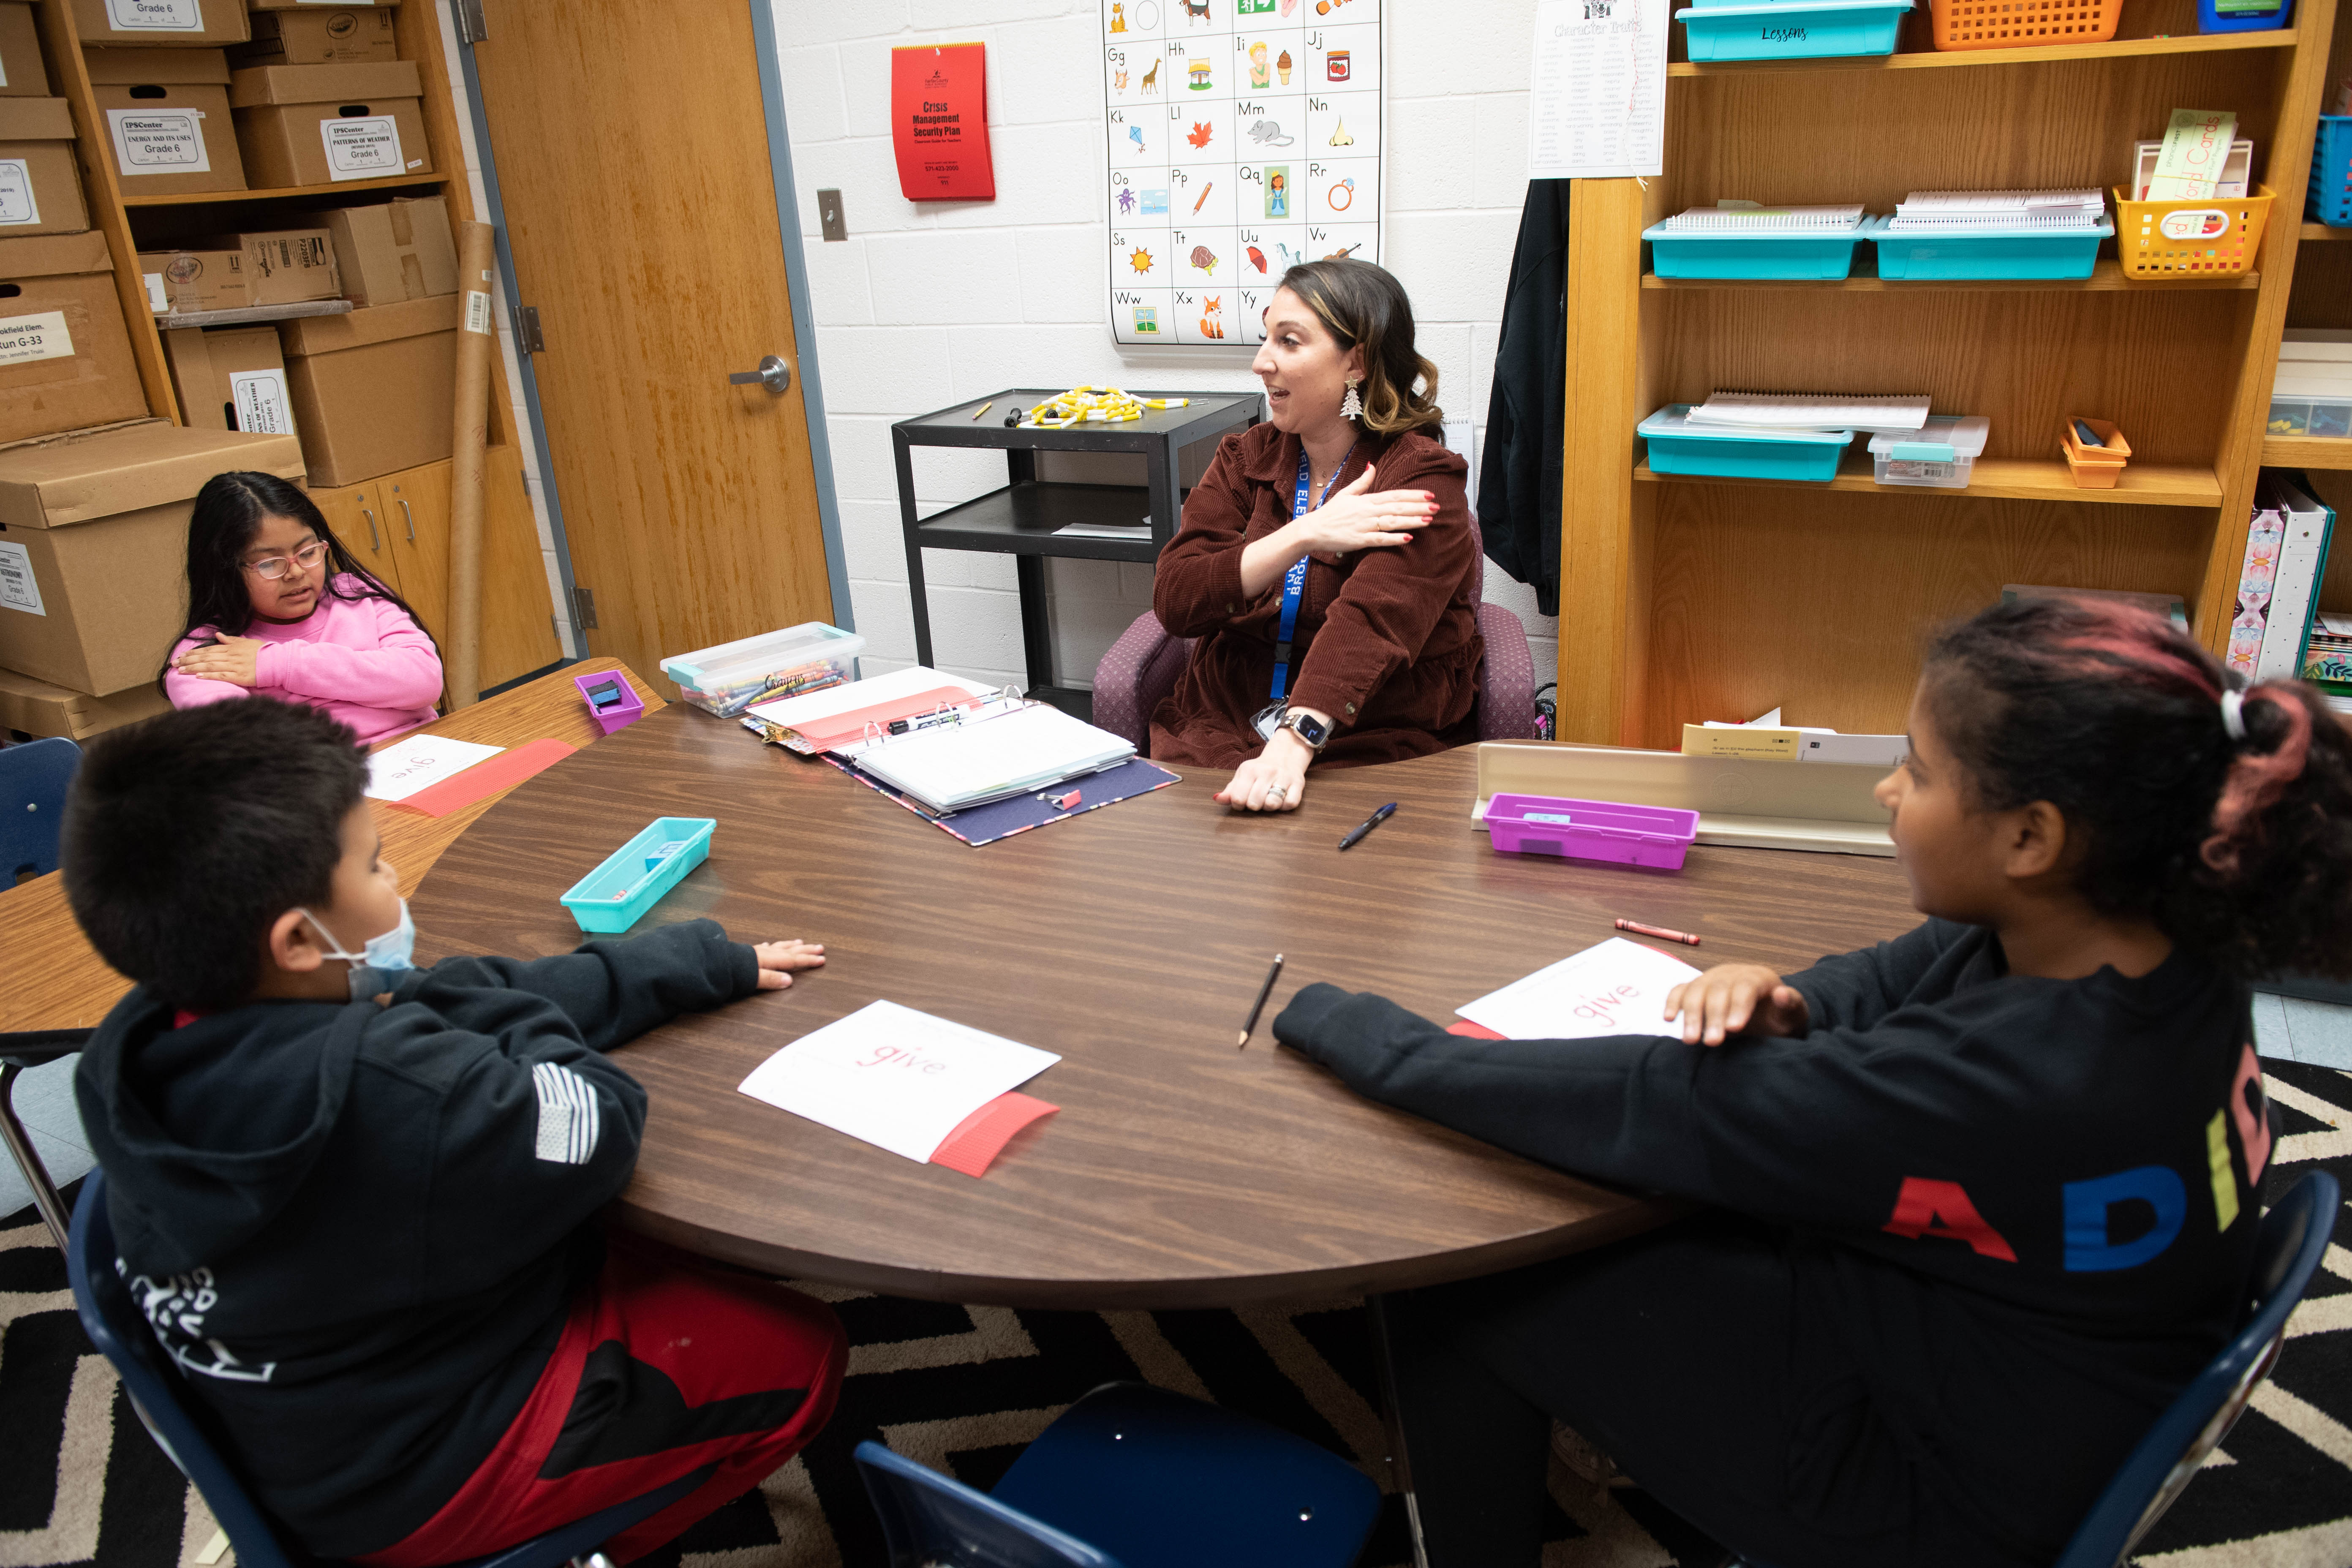 “Load it, tap it, trace it,” reading interventionist Jennings Johnston says as she directs three third-grade students working on how to overcome the tricky spelling of the word “give.”  “G-I-V-E, G-I-V-E, G-I-V-E,” the students say to themselves as they tap their arms once for each letter in the word. Then, they pick up “bumpy boards” or textured mats and trace out “g-i-v-e” with their fingers on top of them.